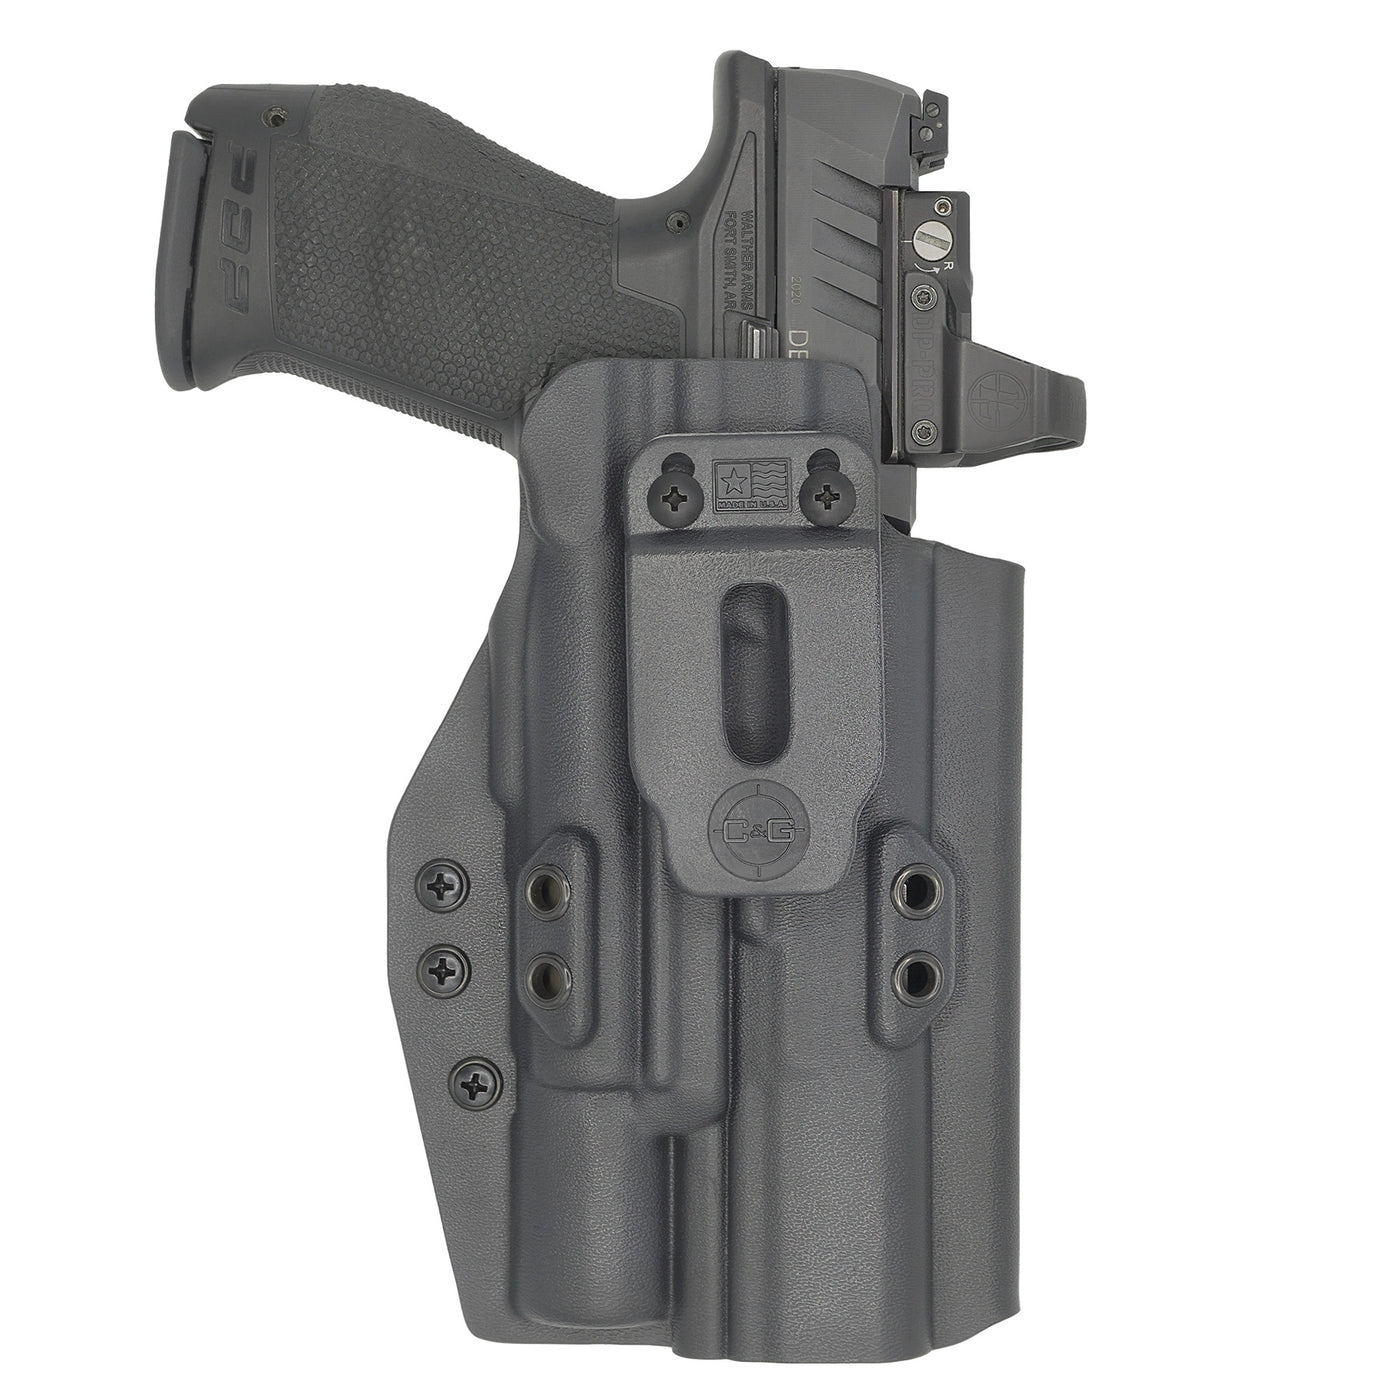 C&G Holsters Quickship IWB Tactical S&W M&P Surefire X300 in holstered position